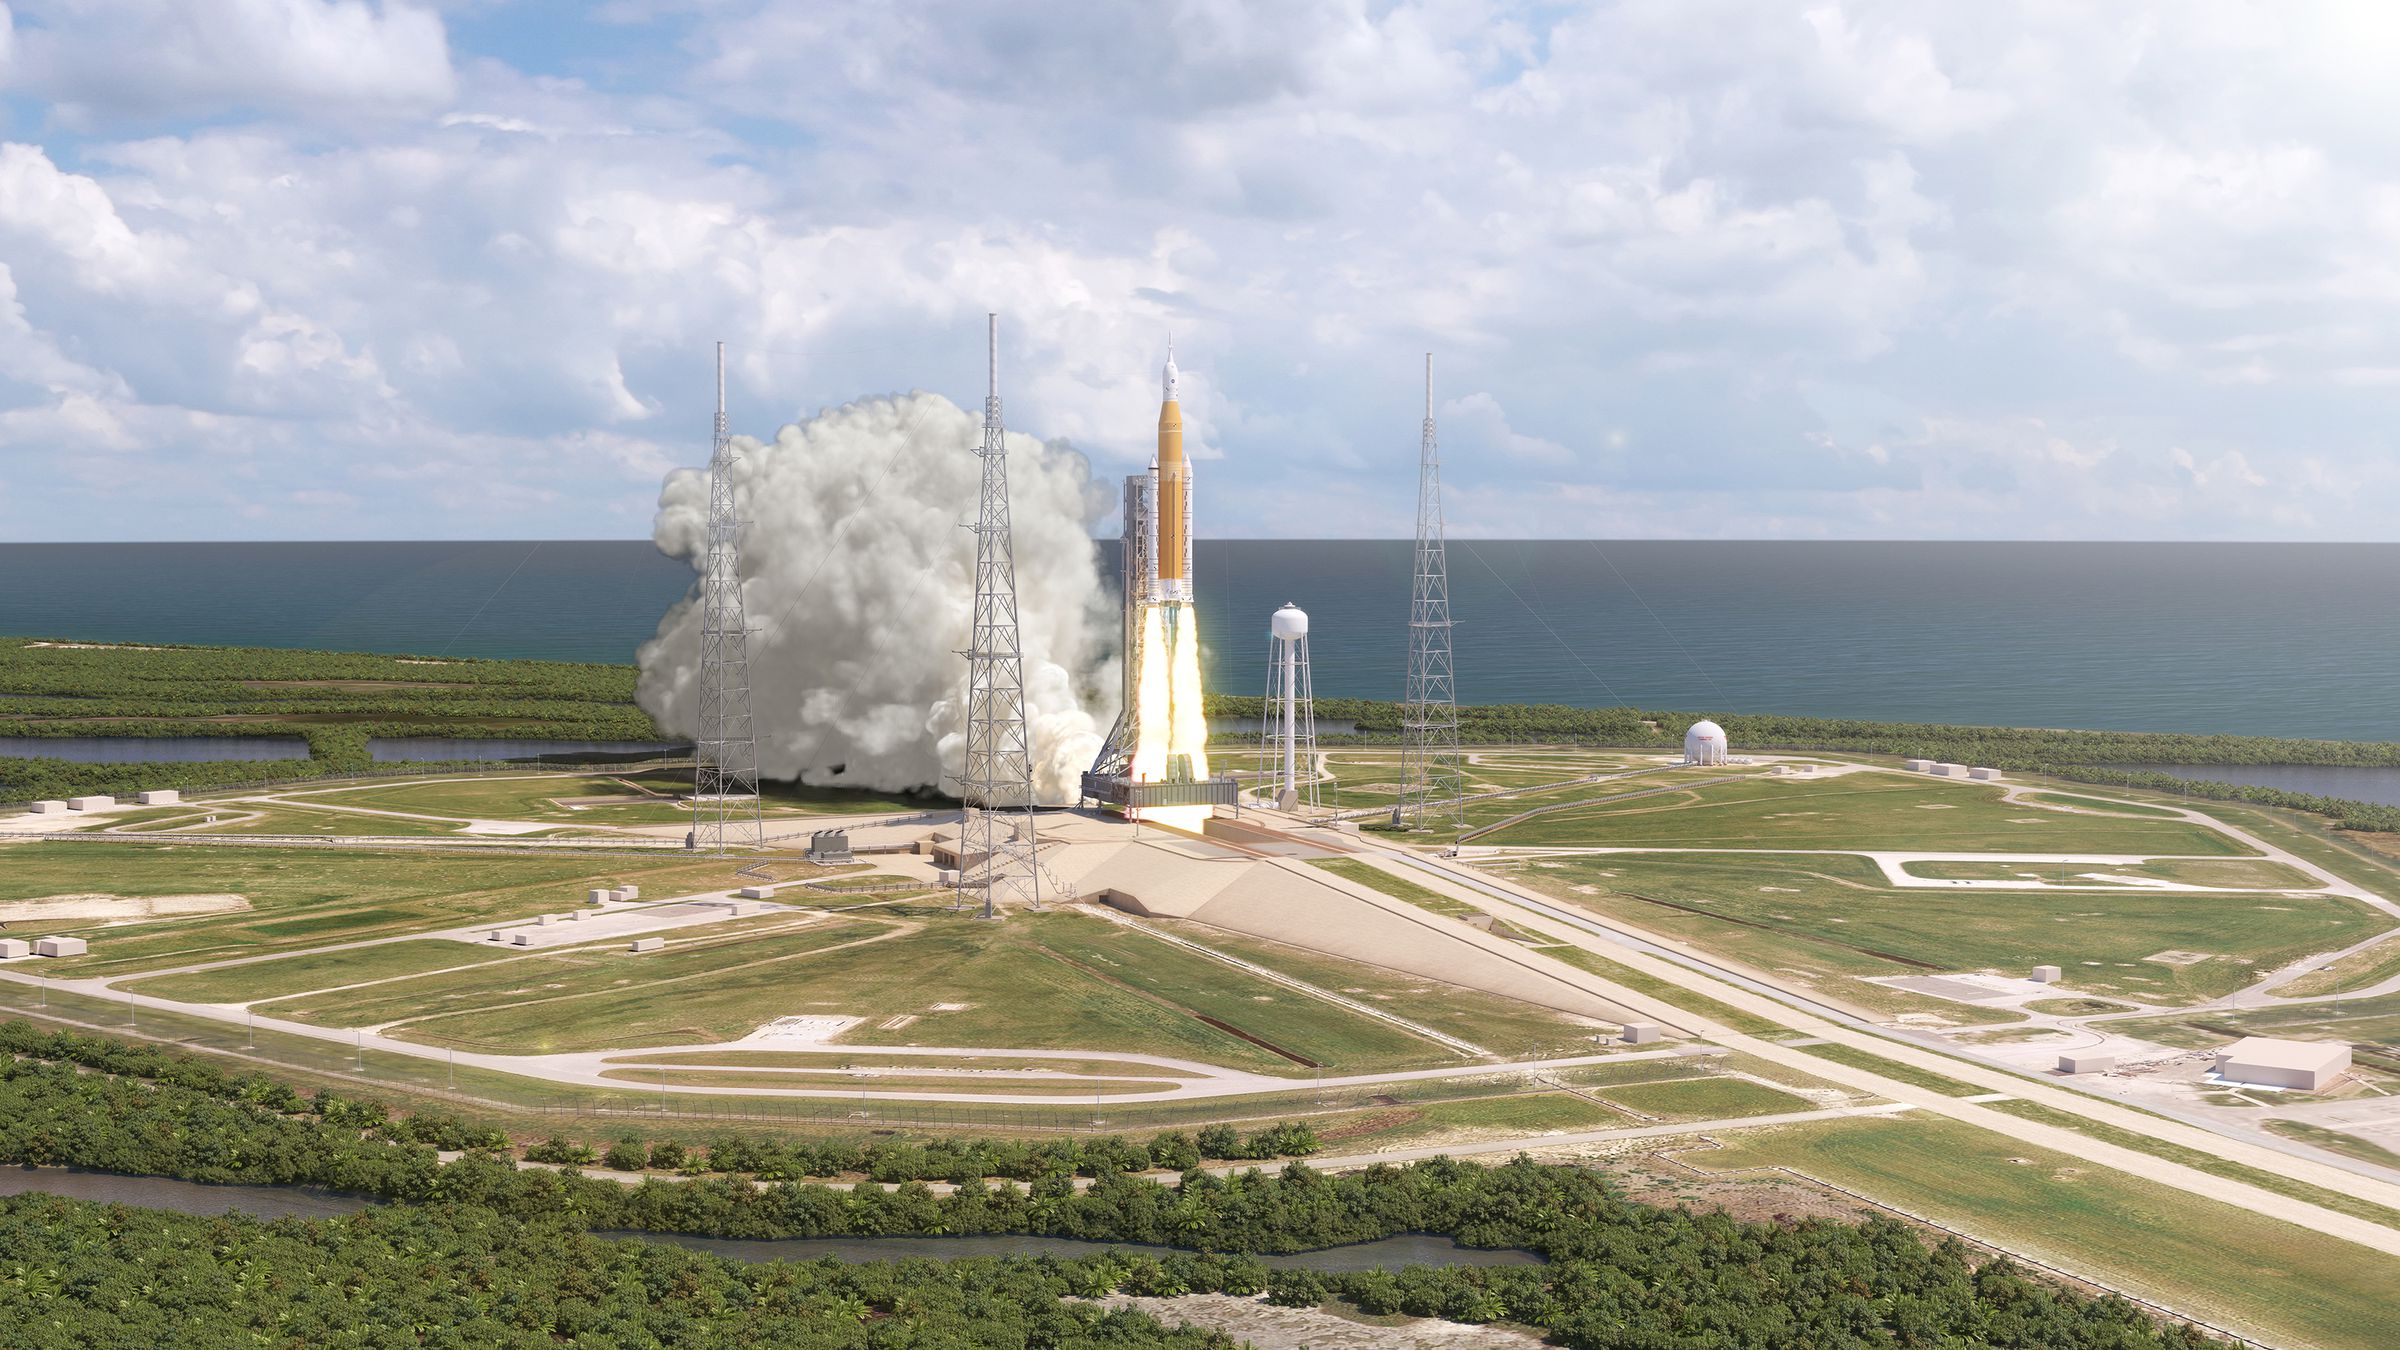 An artistic rendering of the SLS launching from the Kennedy Space Center in Florida.